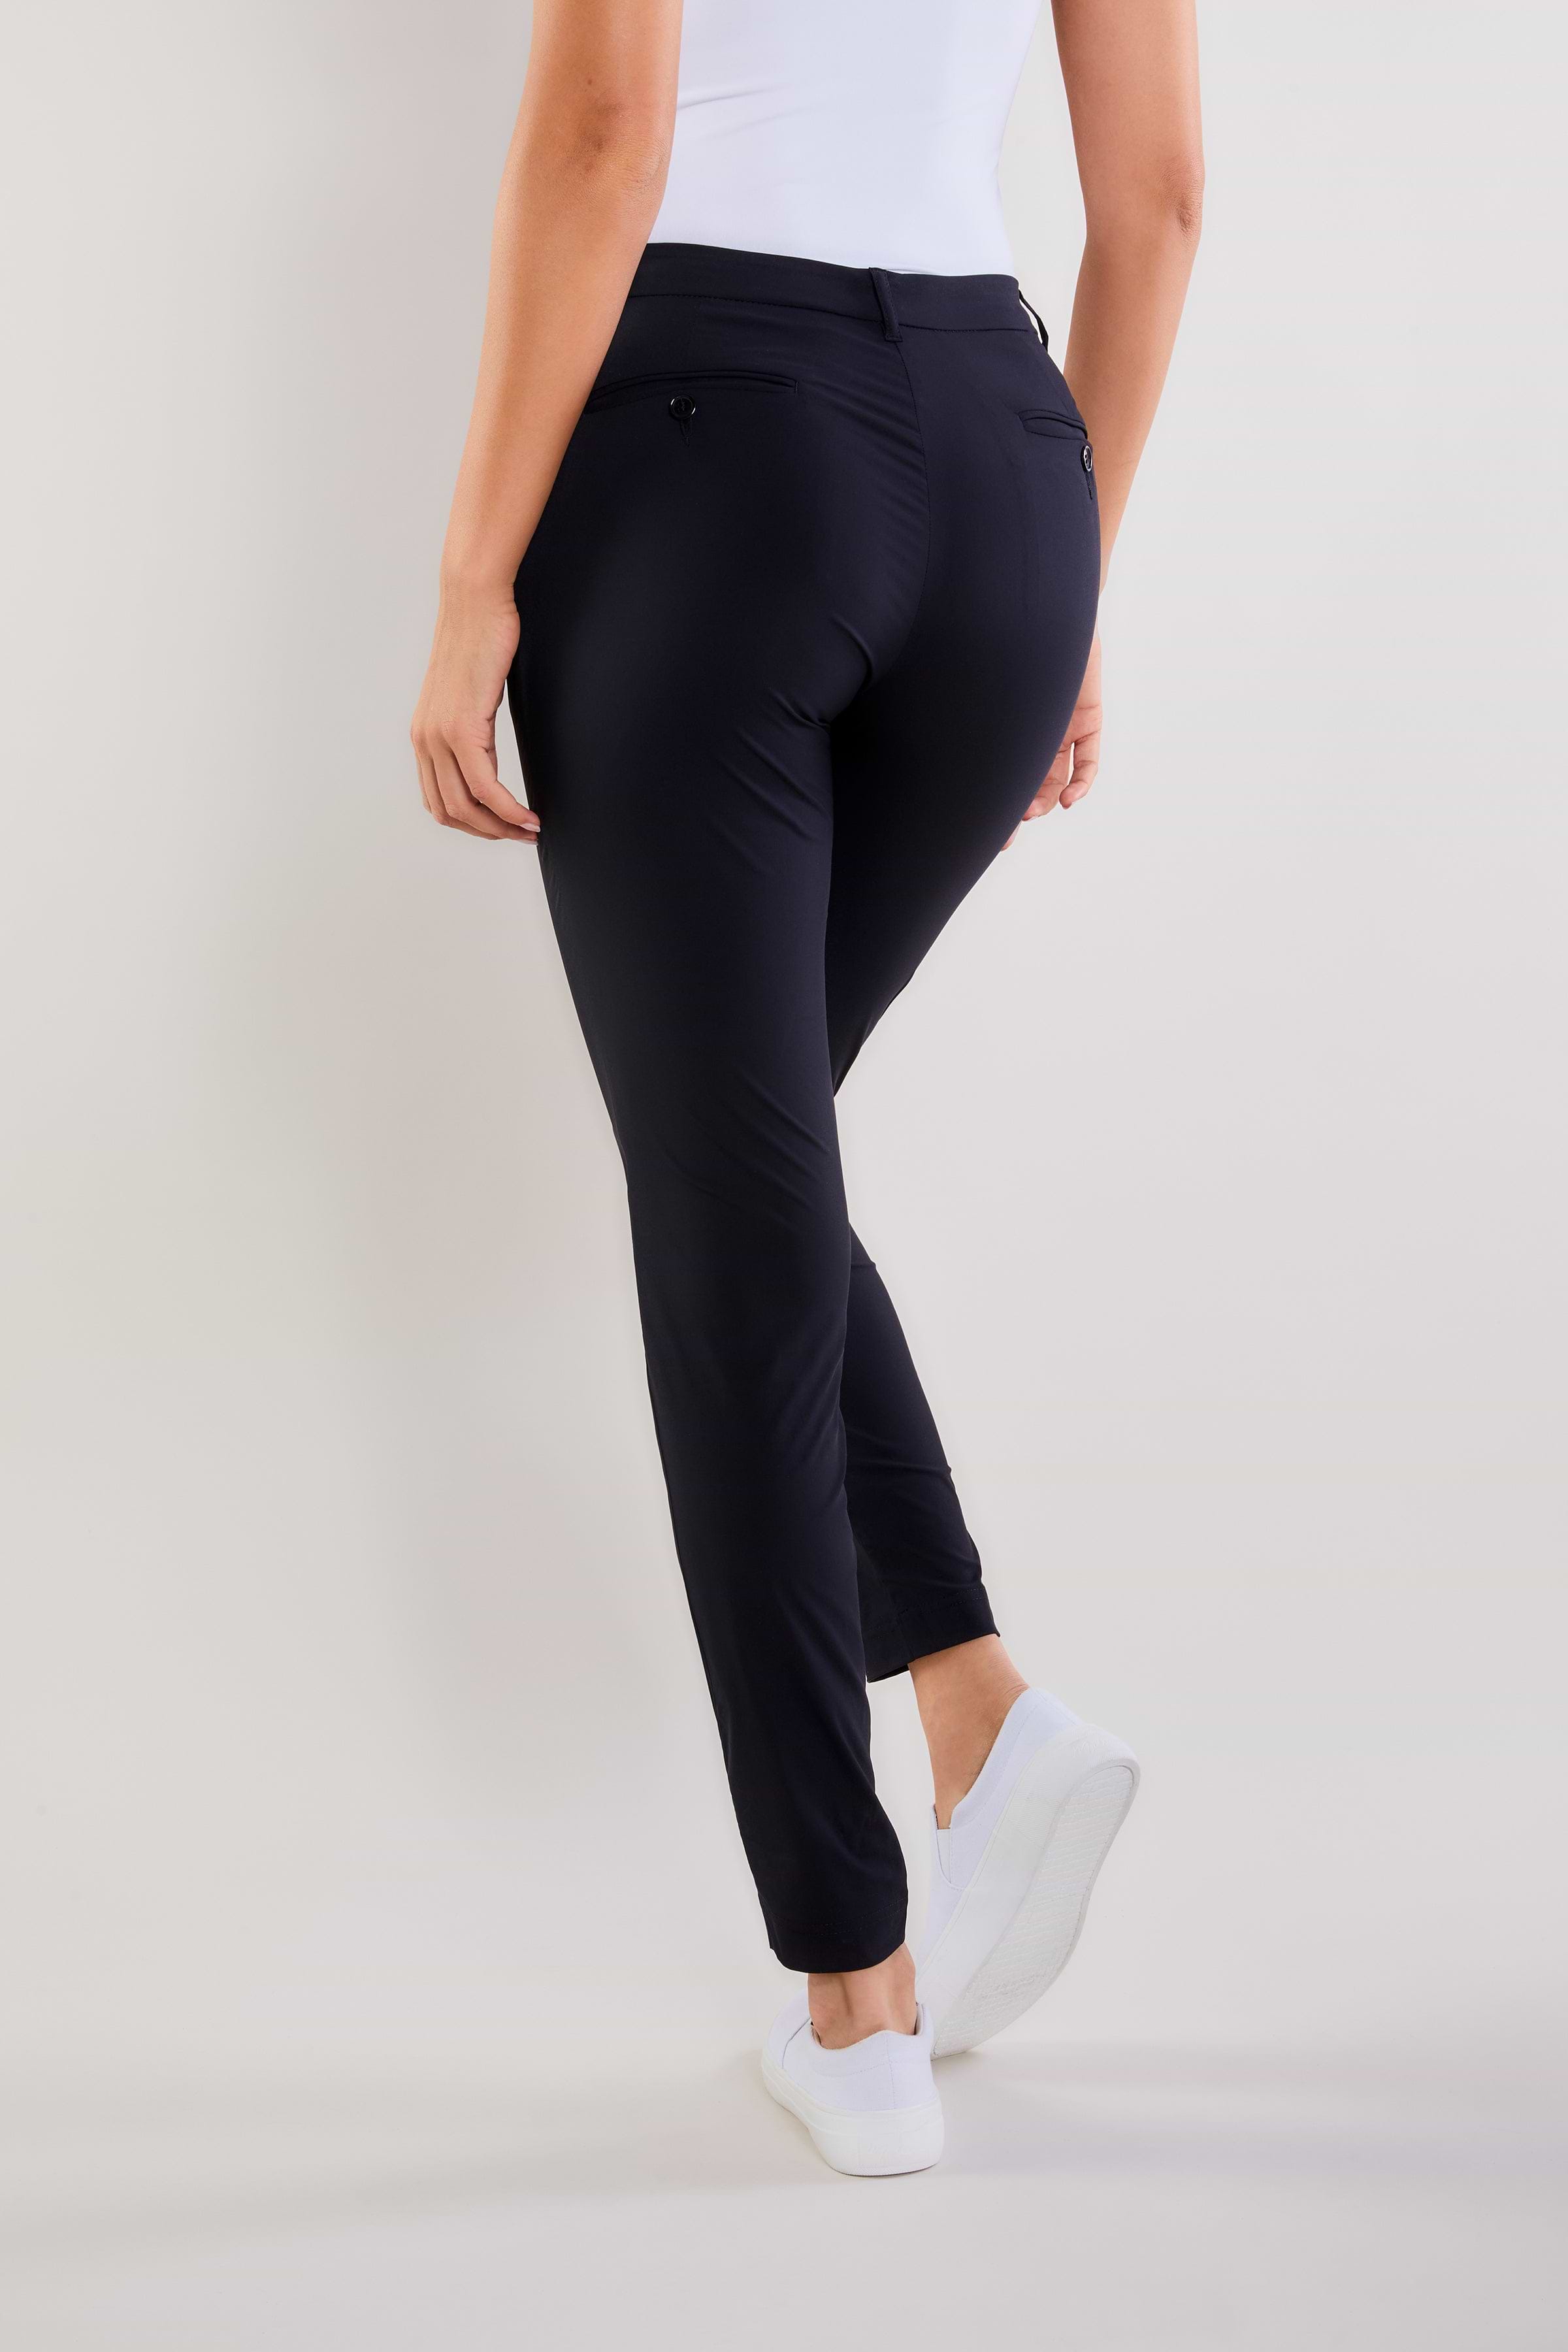 The Best Travel Pants. Back Profile of the Thea Curvy Pant in Black